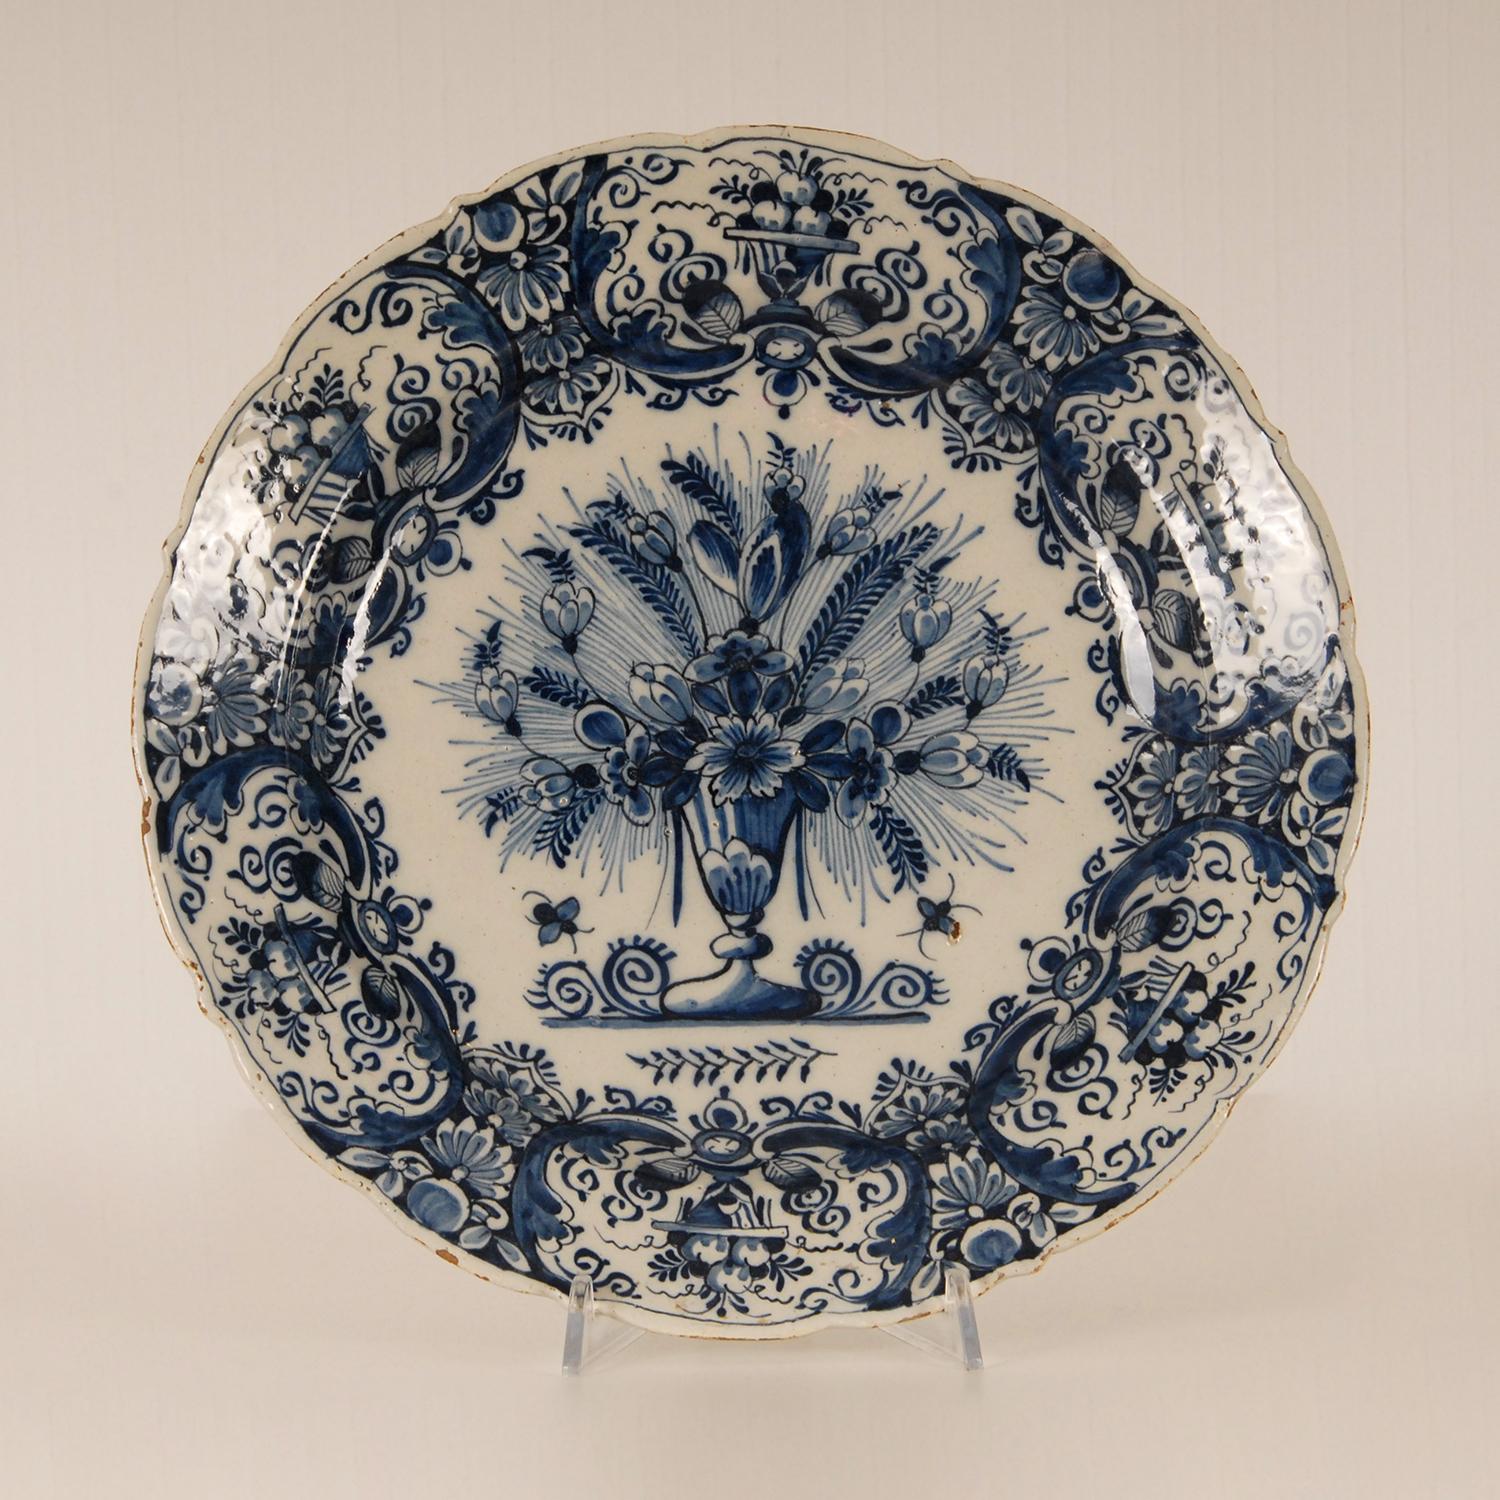 18th Century Dutch delftware cabinet or collectors plate.
Marked The gilt Flower Pot factory
Hand crafted tin glazed earthenware pottery
Fully handpainted in blue and white floral decor
In the center a vase with flowers surrounded by 6